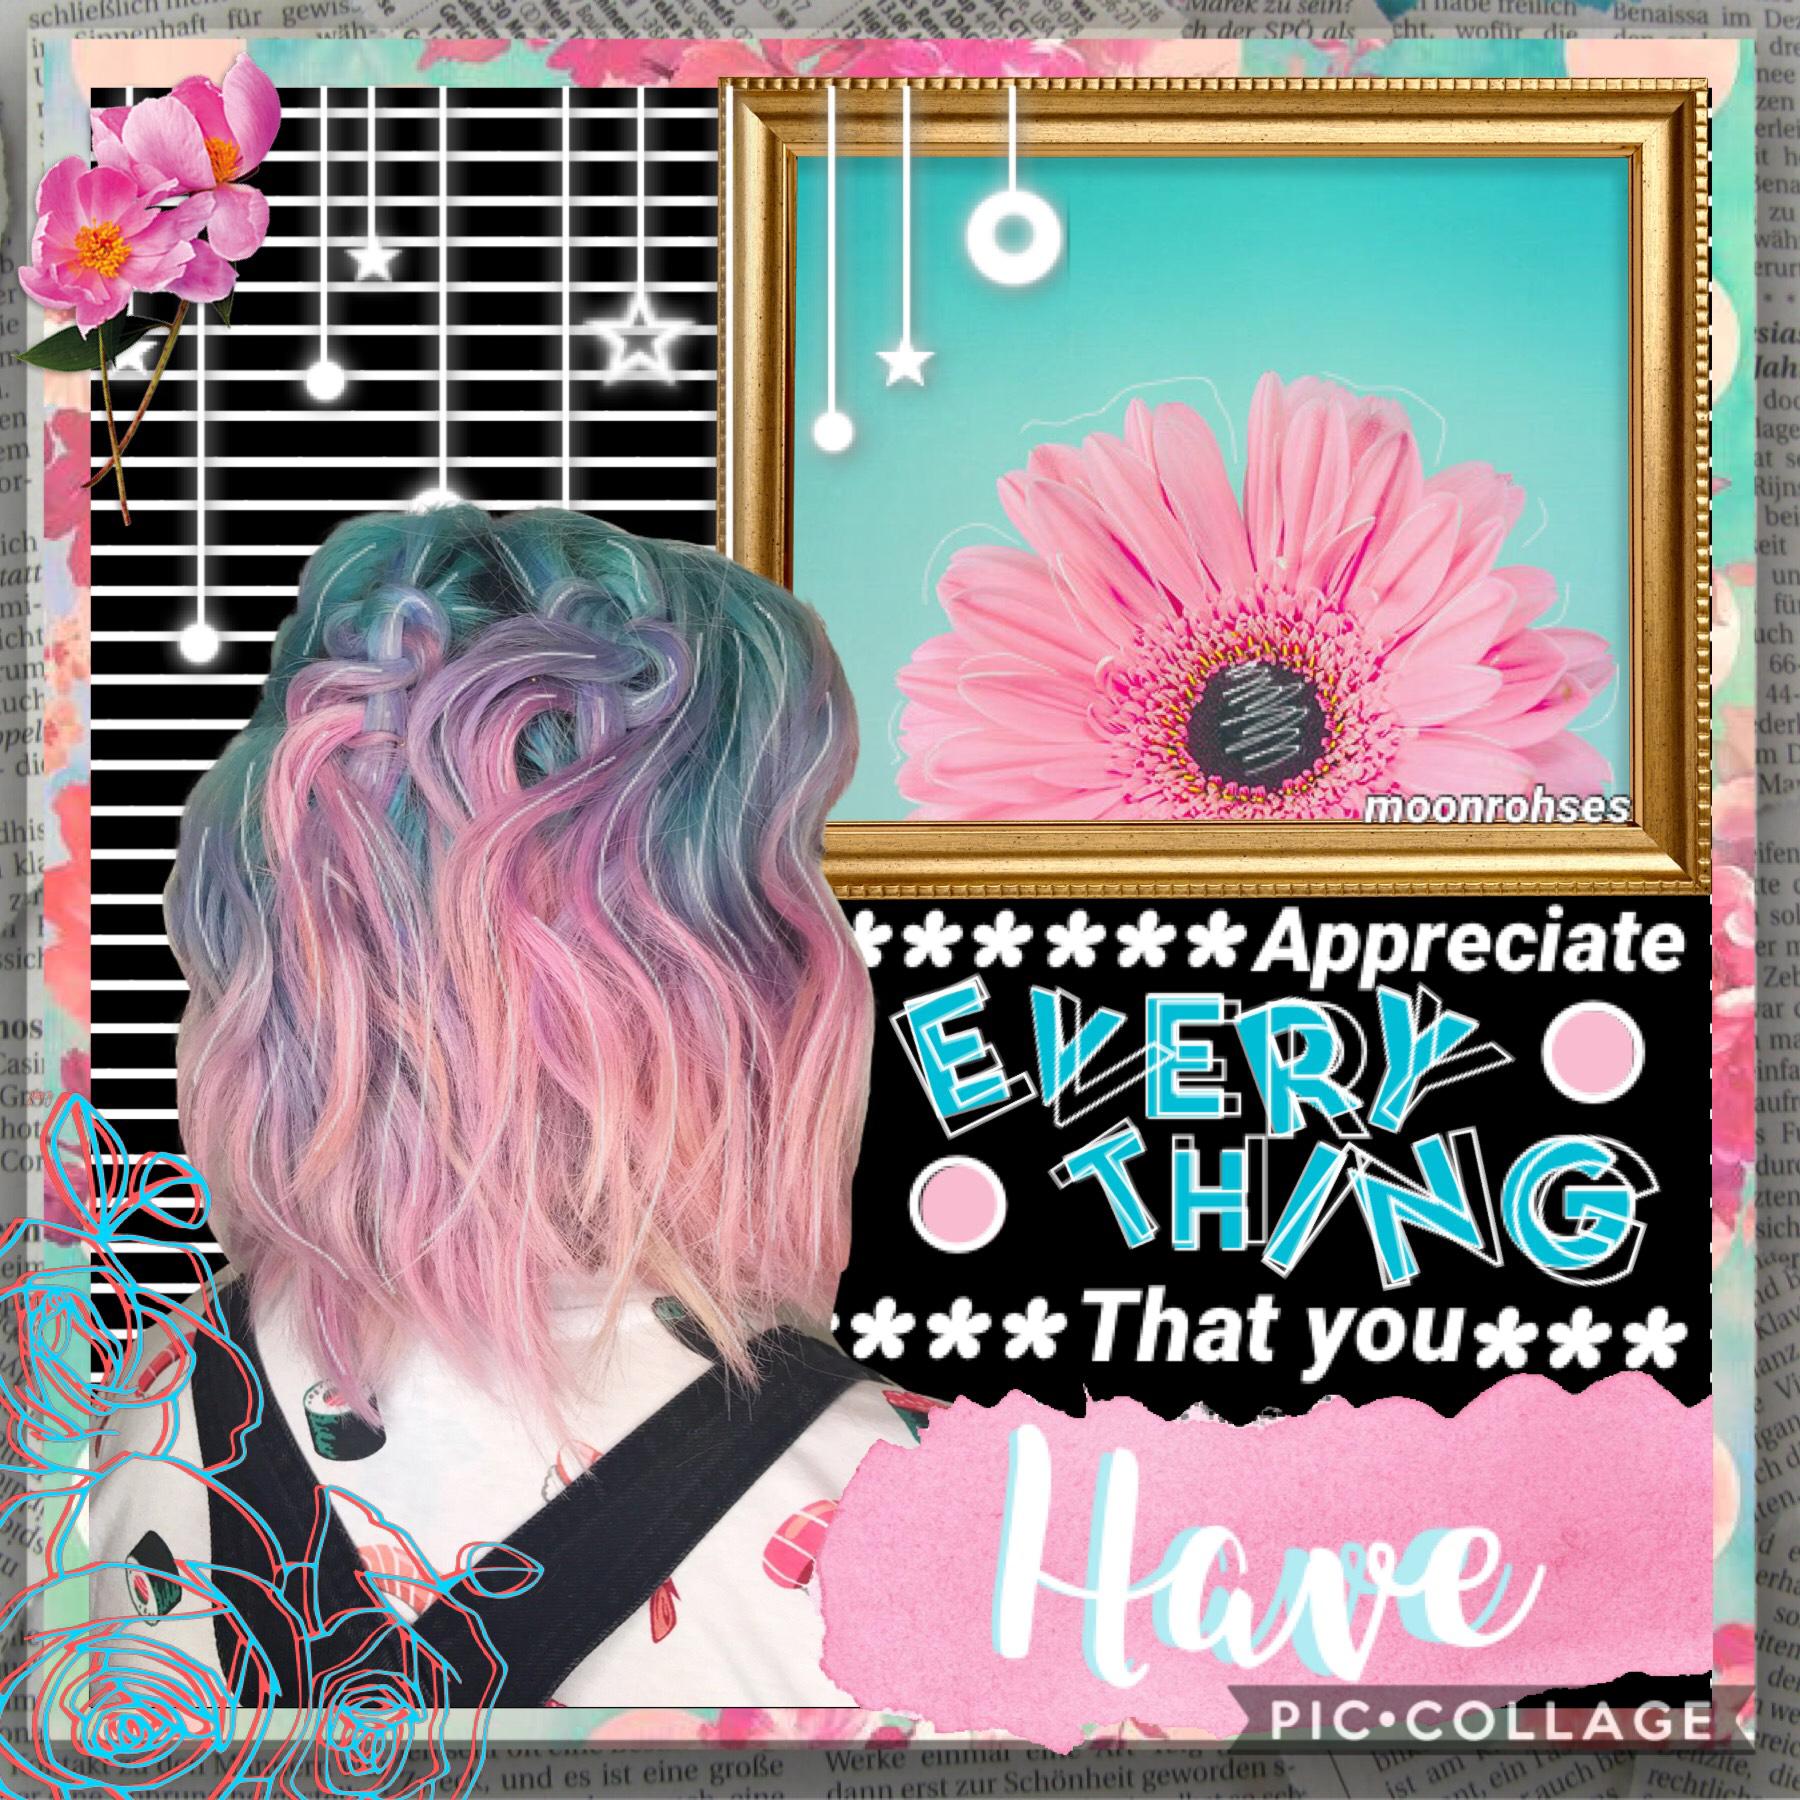 🍭 t a p 🍭

I tried doing an only pc edit. Not sure how I feel about this 🤷‍♀️ 

Rate?/10